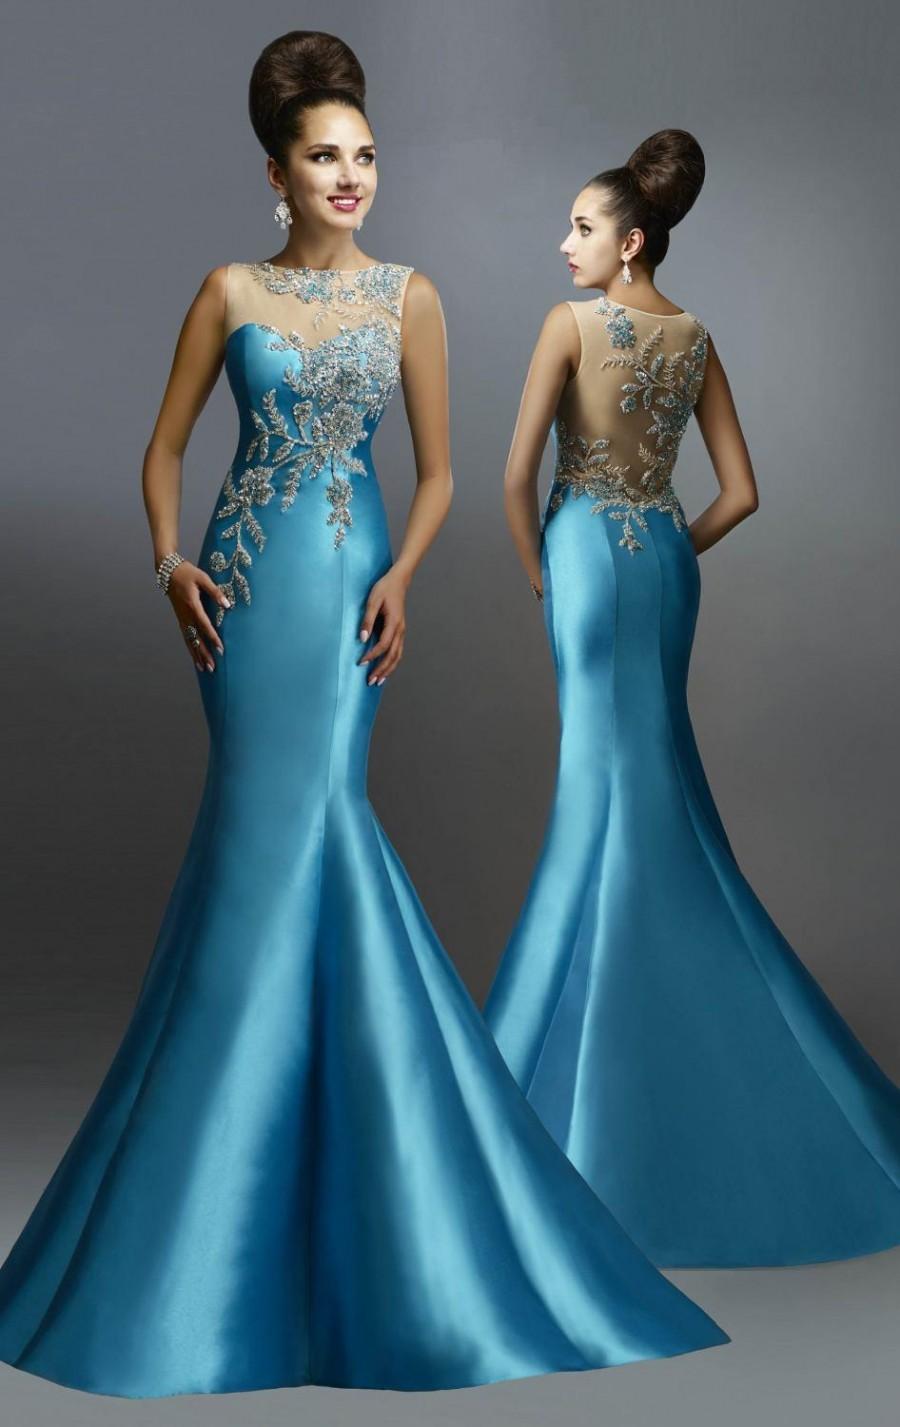 Mariage - New Arrival 2015 Mermaid Evening Dresses With Beads Crystal Sheer Sexy Backless Pageant Gowns Party Formal Dresses Designer By Janique Online with $116.92/Piece on Hjklp88's Store 